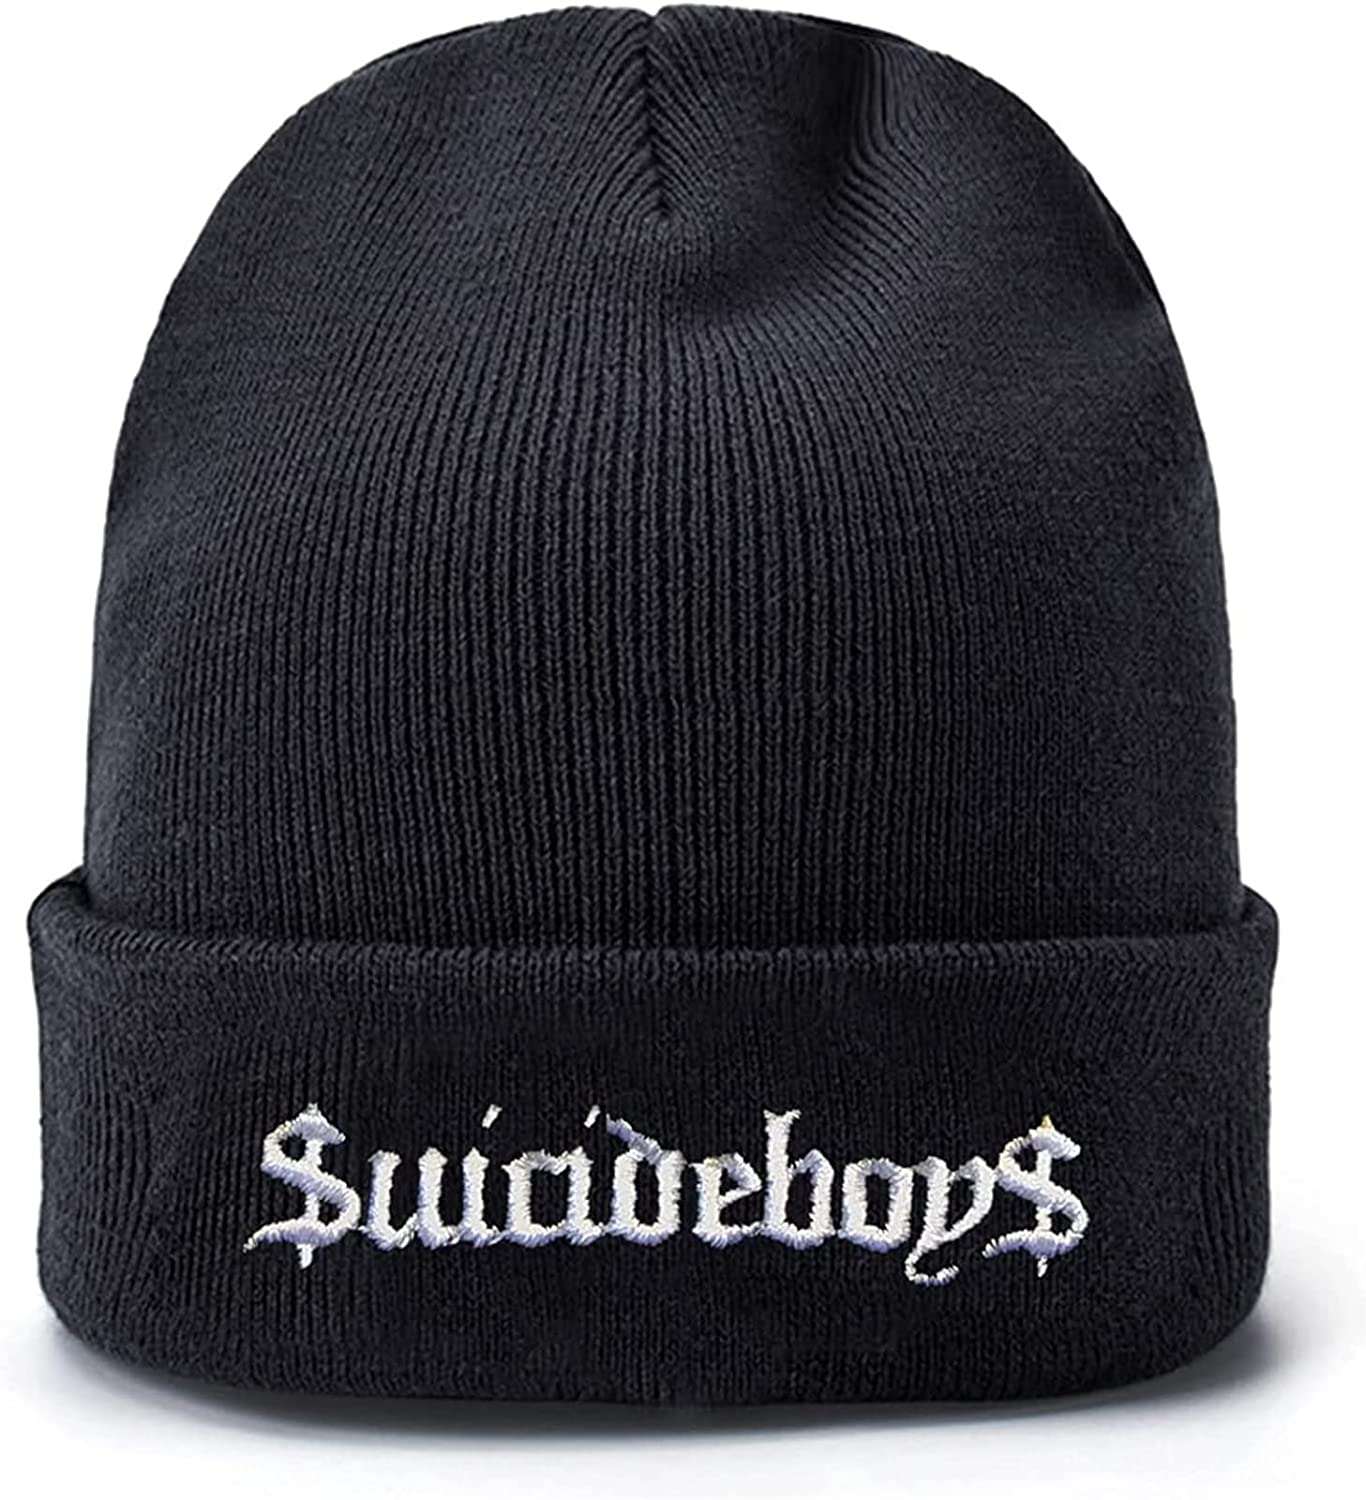 gogoherhome Suicide Logo Soft Toboggan Weather Cap Men Women for Warm Knit Black Embroidered Beanie Hats Cold Boys Stretchy for